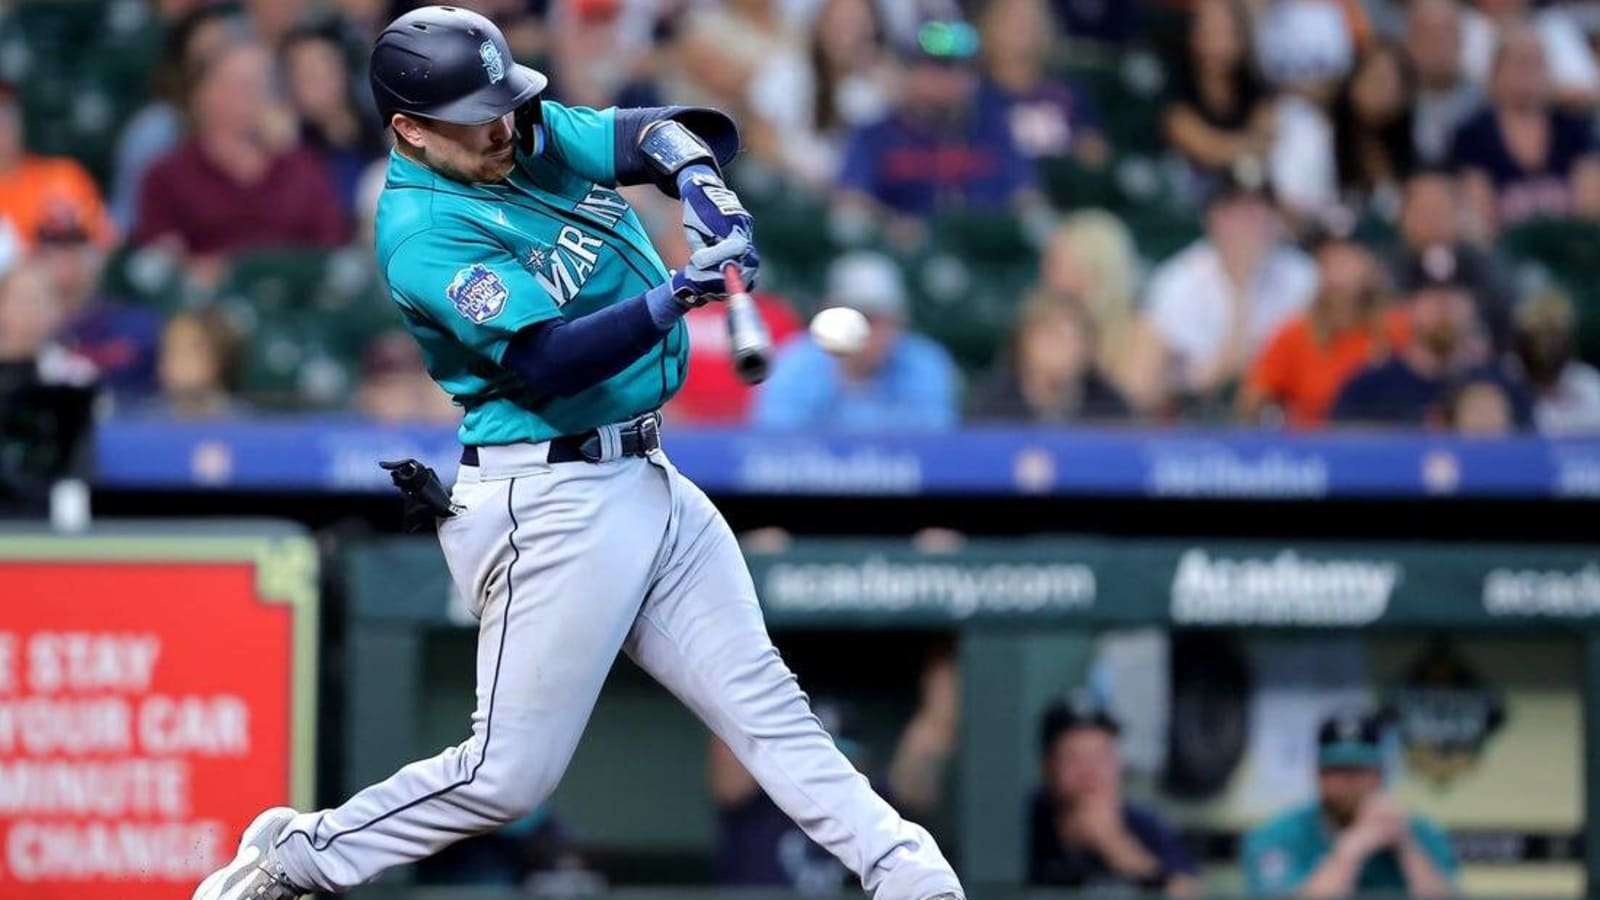 Mariners complete sweep of Astros to tighten wild-card race